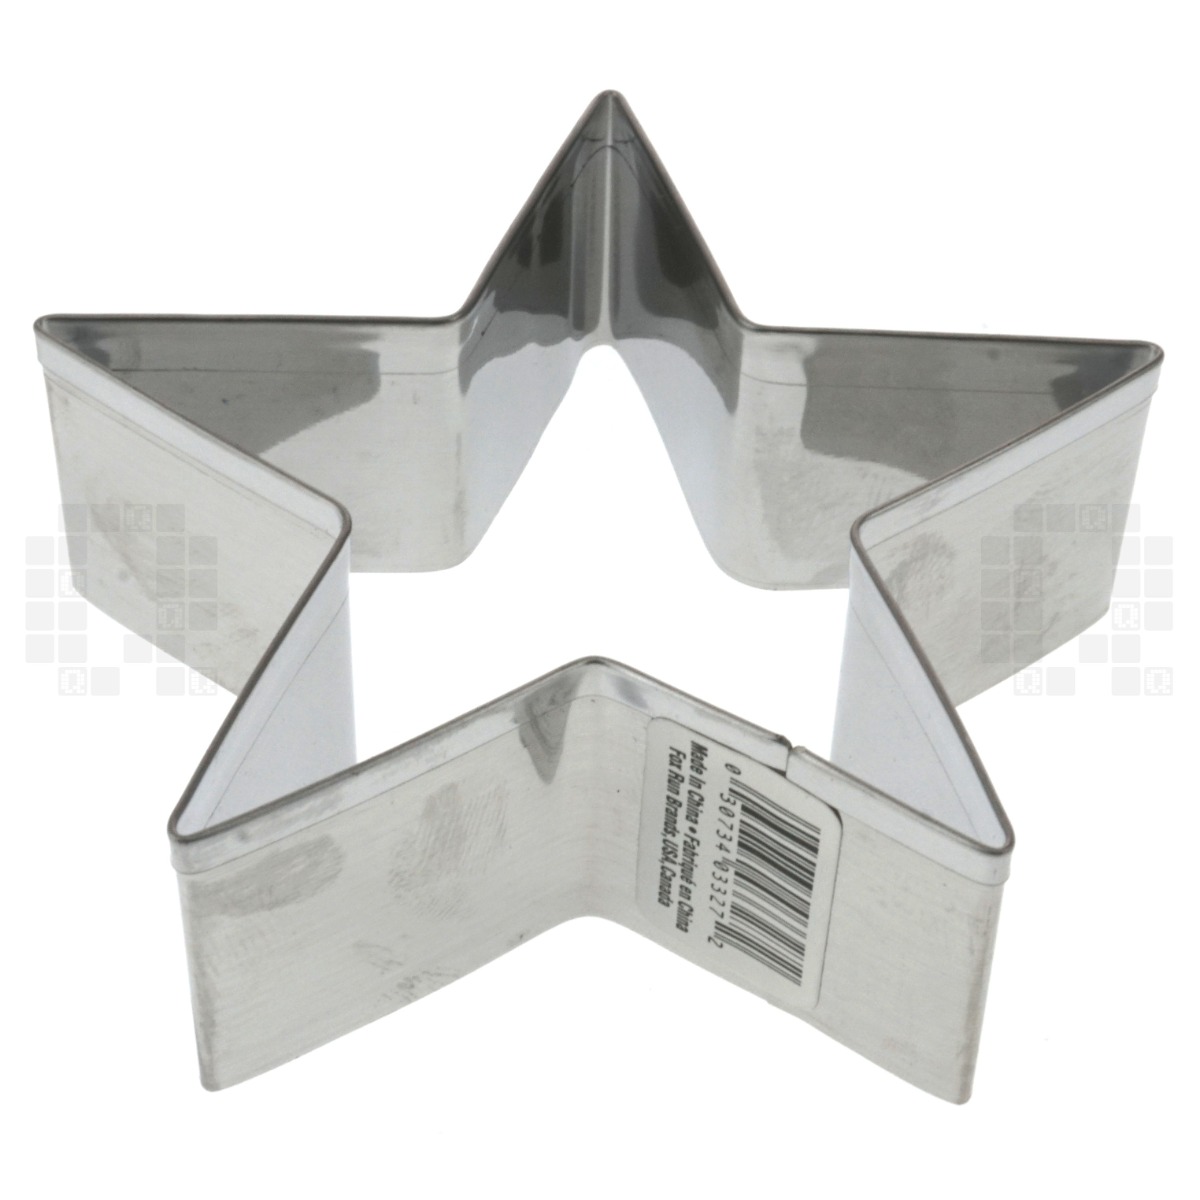 Stainless-Steel Pastry Cutters